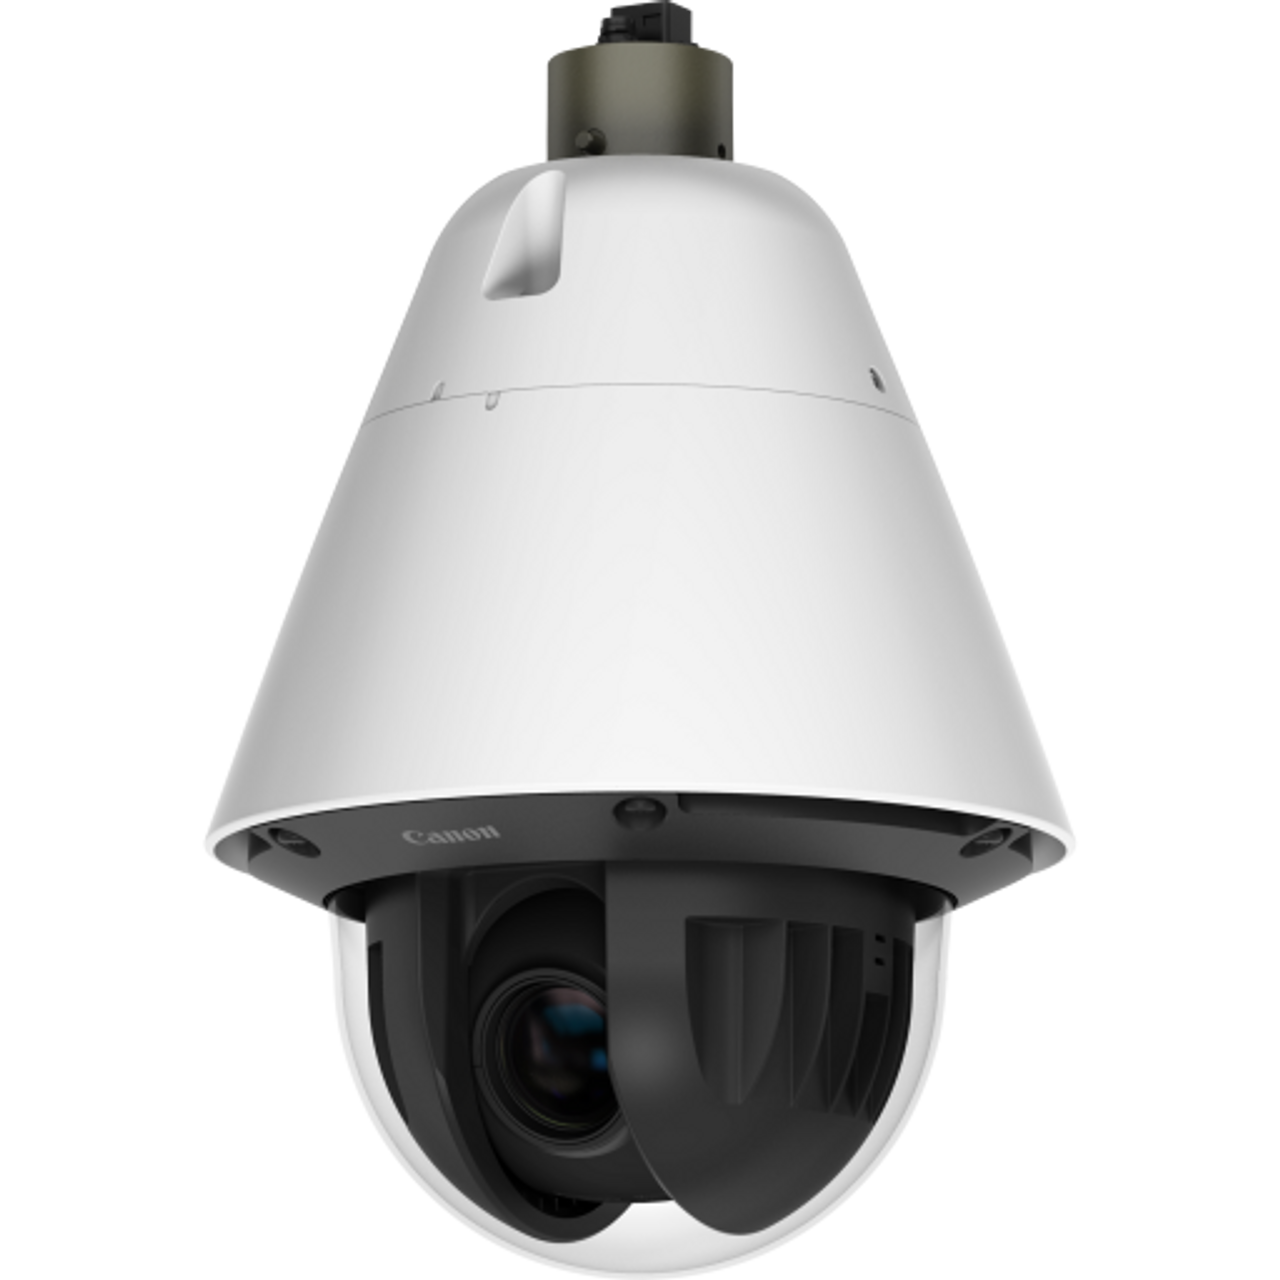 Axis Canon VB-R10VE (H2) 720p 30x PTZ Vandal Outdoor Dome Network Camera